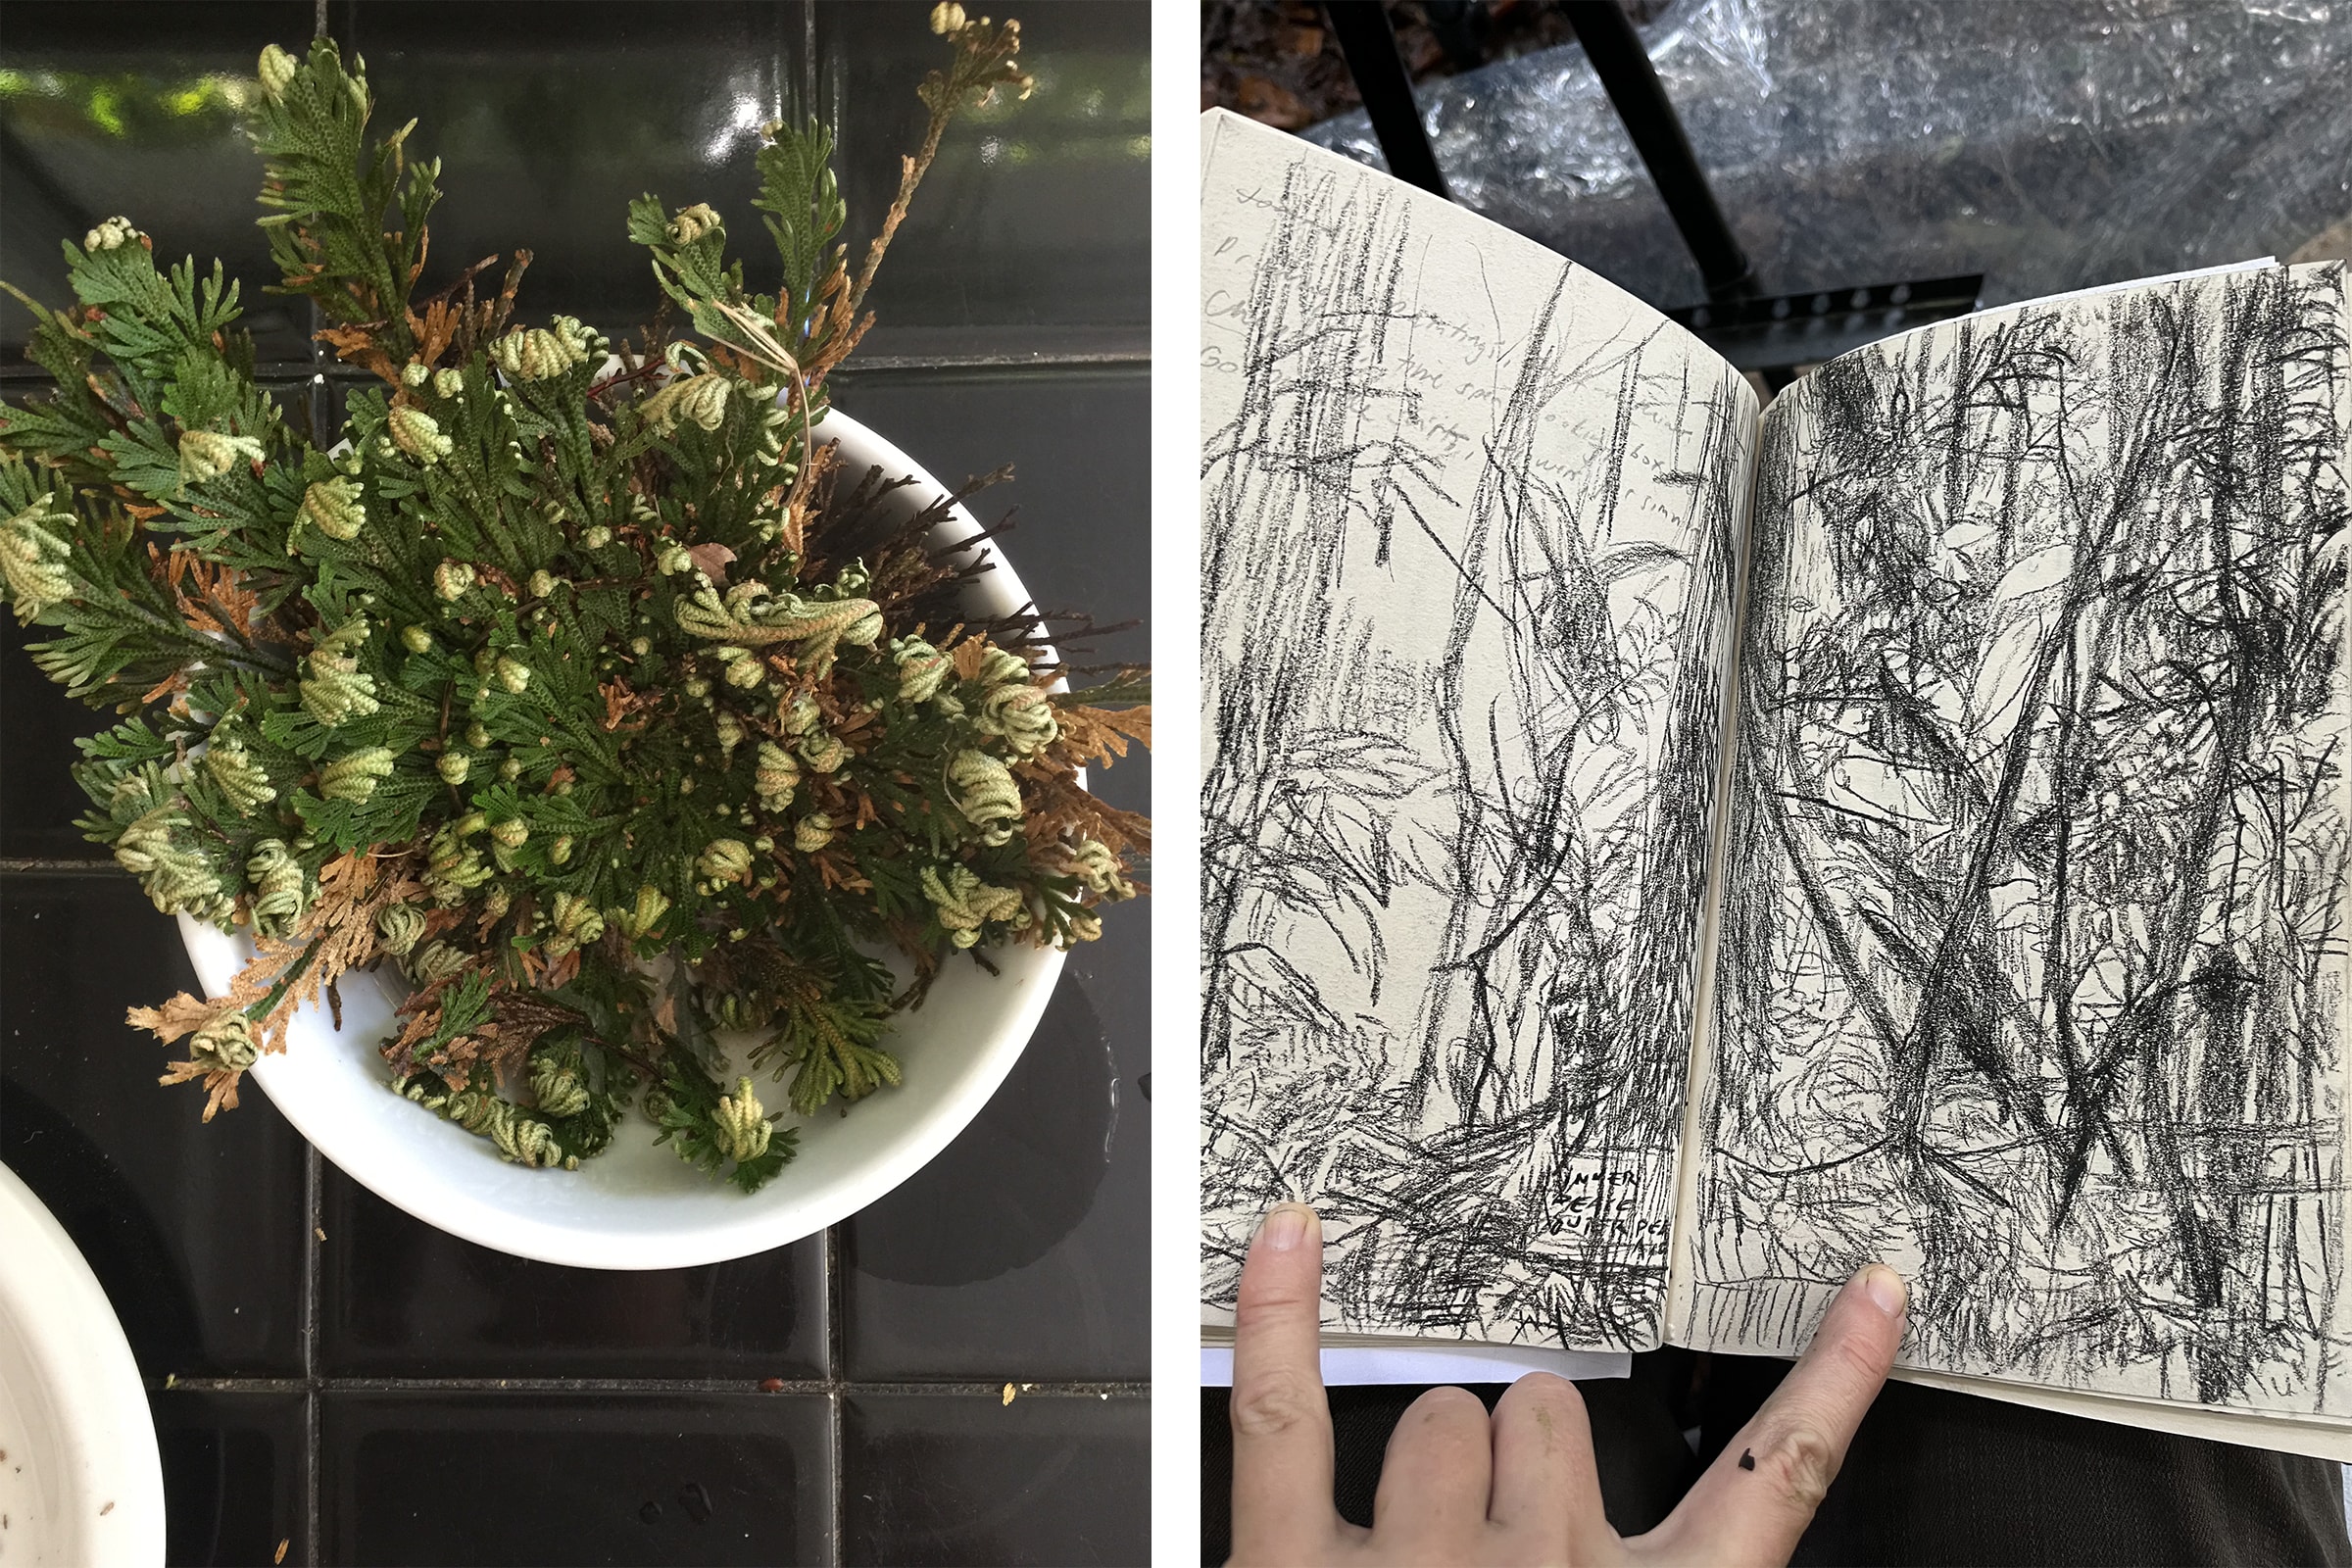 Left: A gift from the artist Carol Bove, 'a resurrection plant called a Selaginella lepidophylla'. Right:  Sketchbook drawings by the artist, on site at a conserved cloud forest, Cerro Amay.